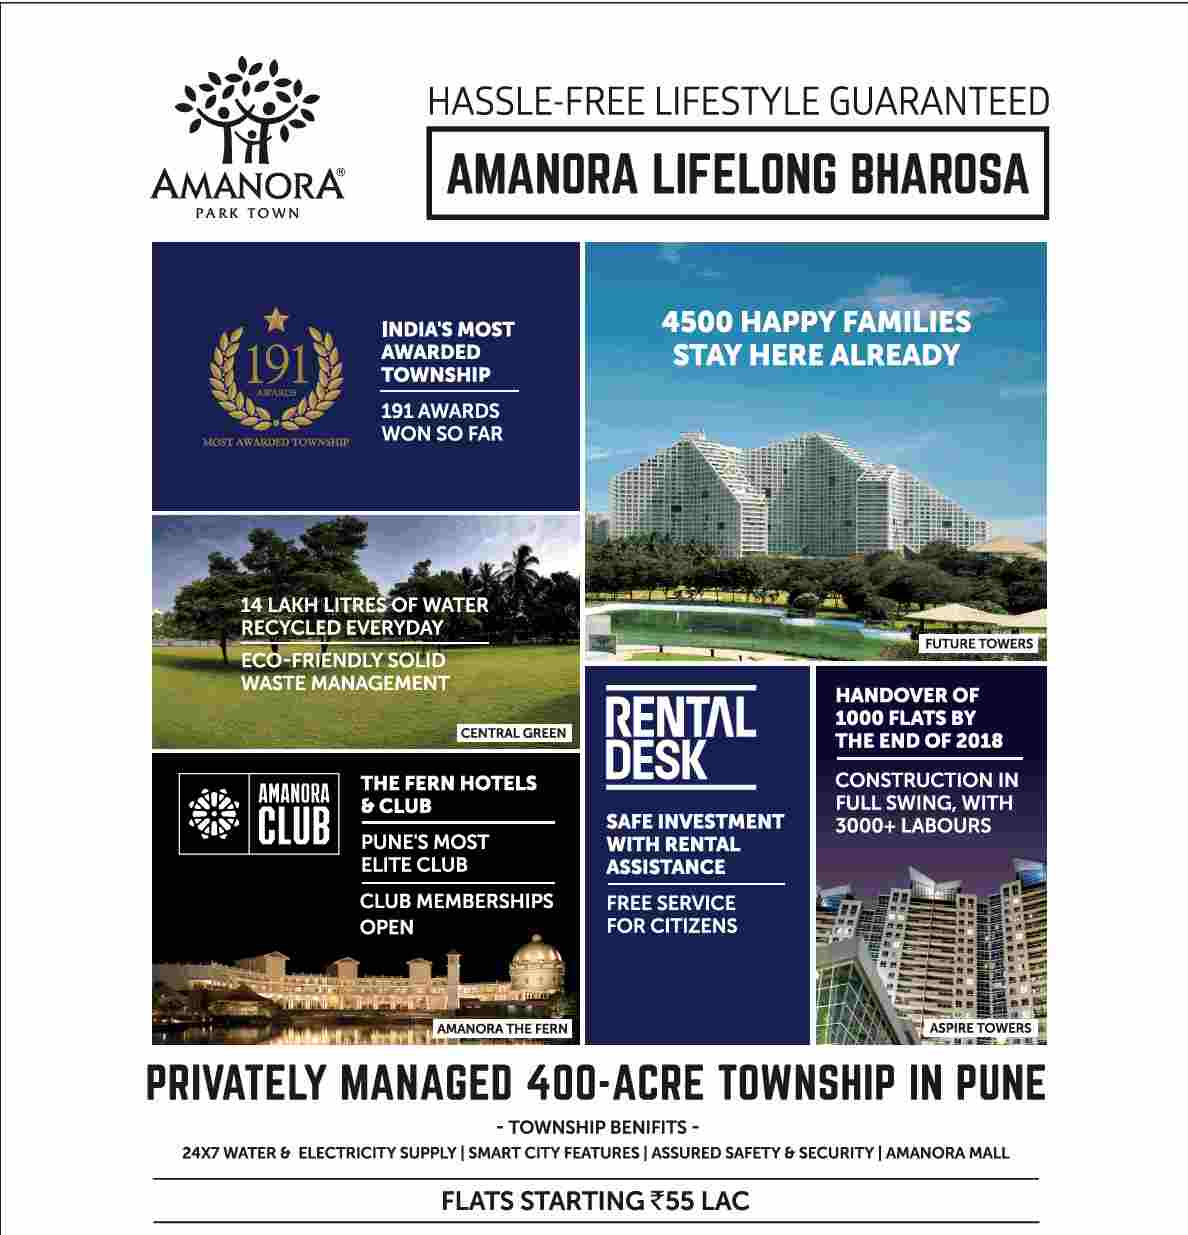 Hassle-free lifestyle guaranteed at Amanora Park Town in Pune Update